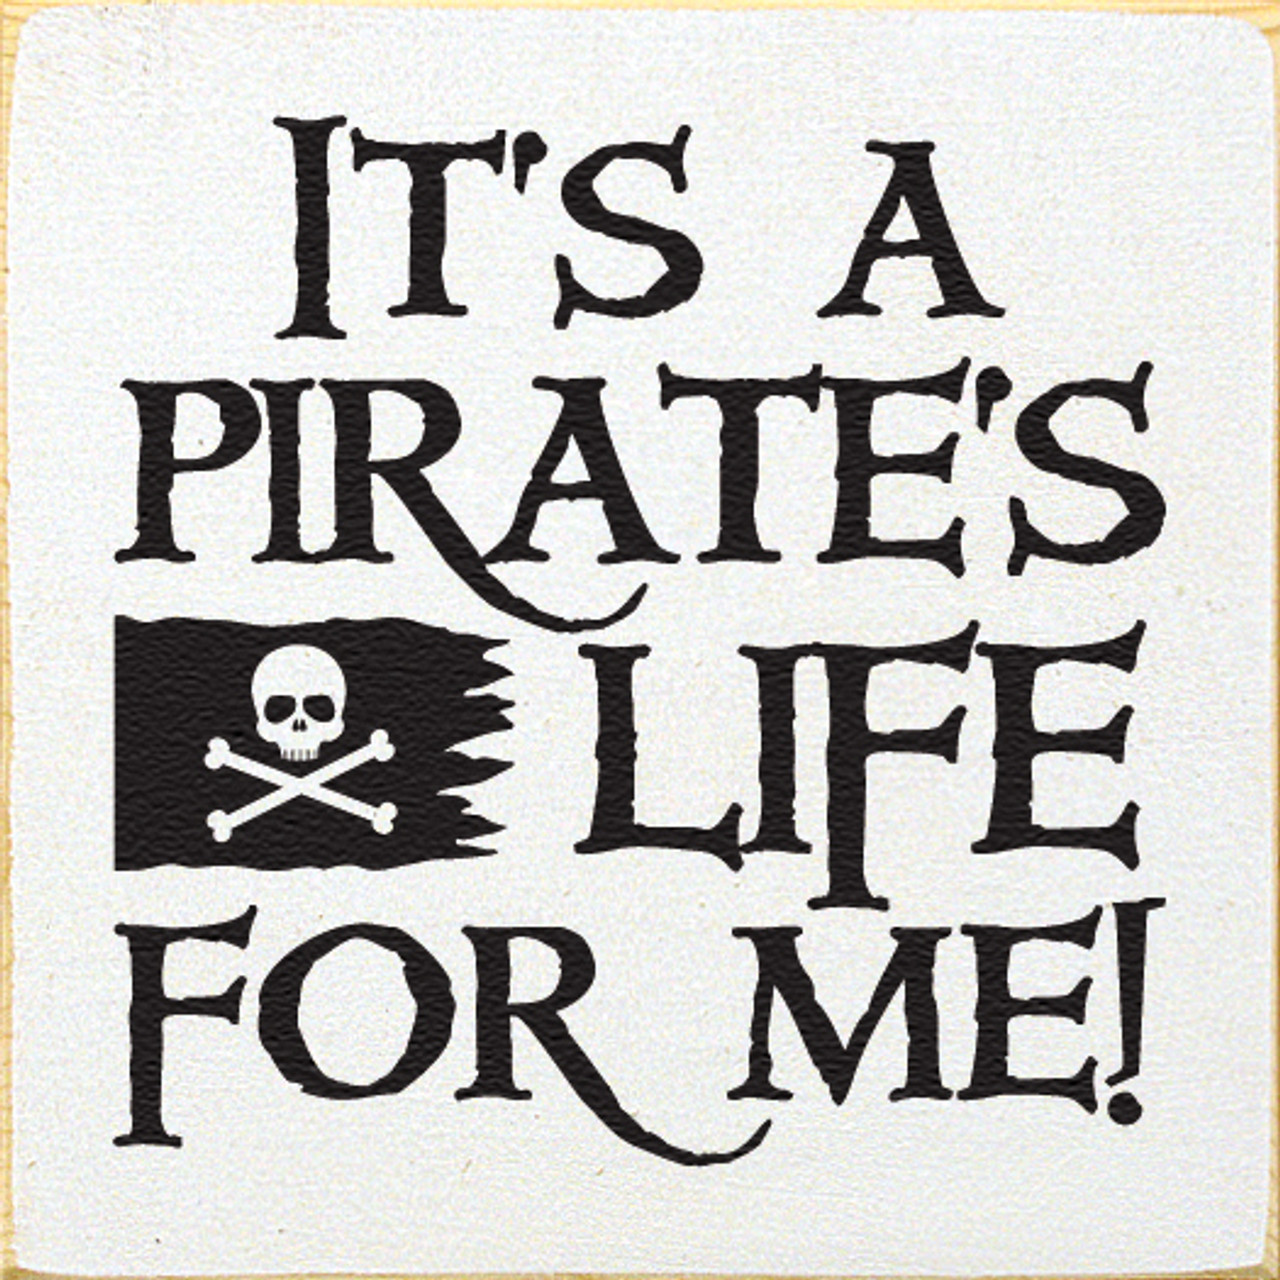 A Pirate for Life